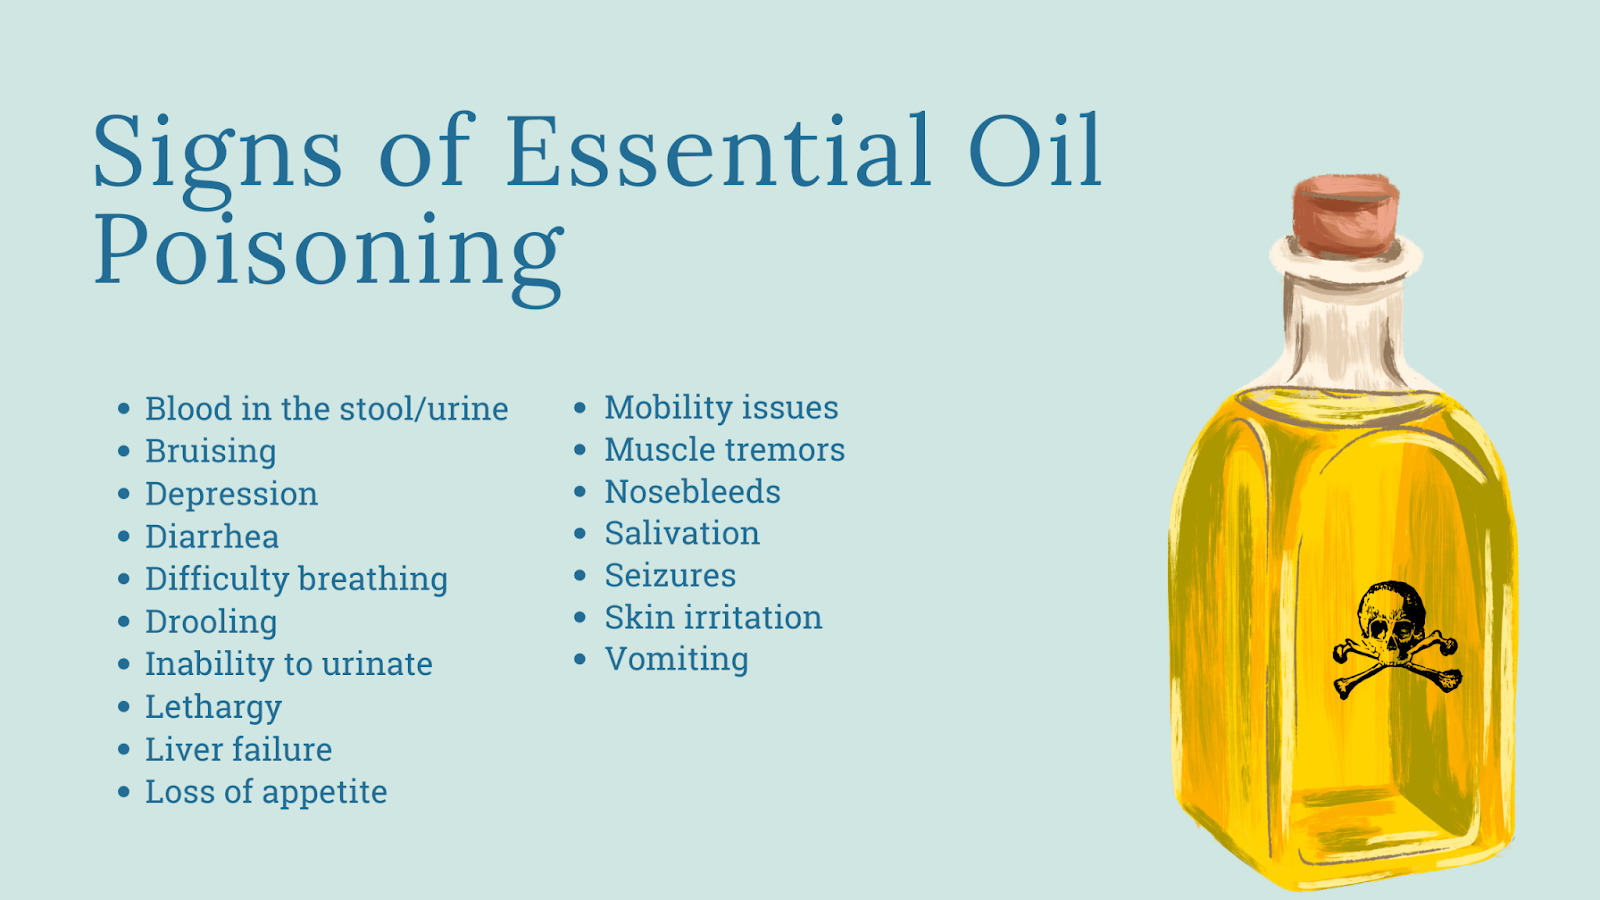 Signs of essential oil poisoning